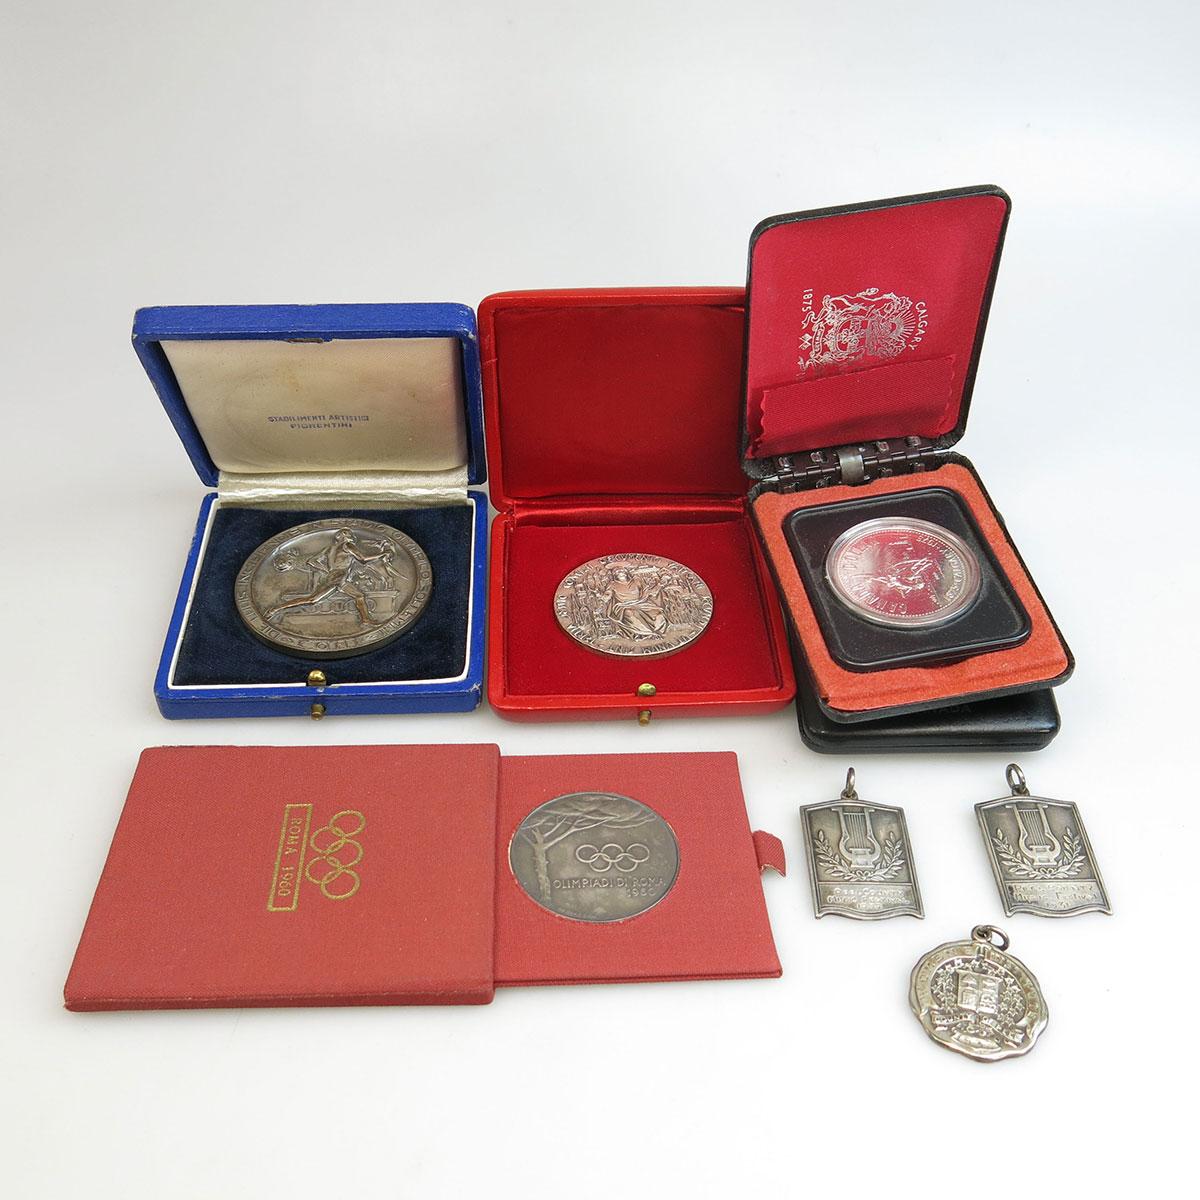 2 Medallions For The 1960 Rome Olympics